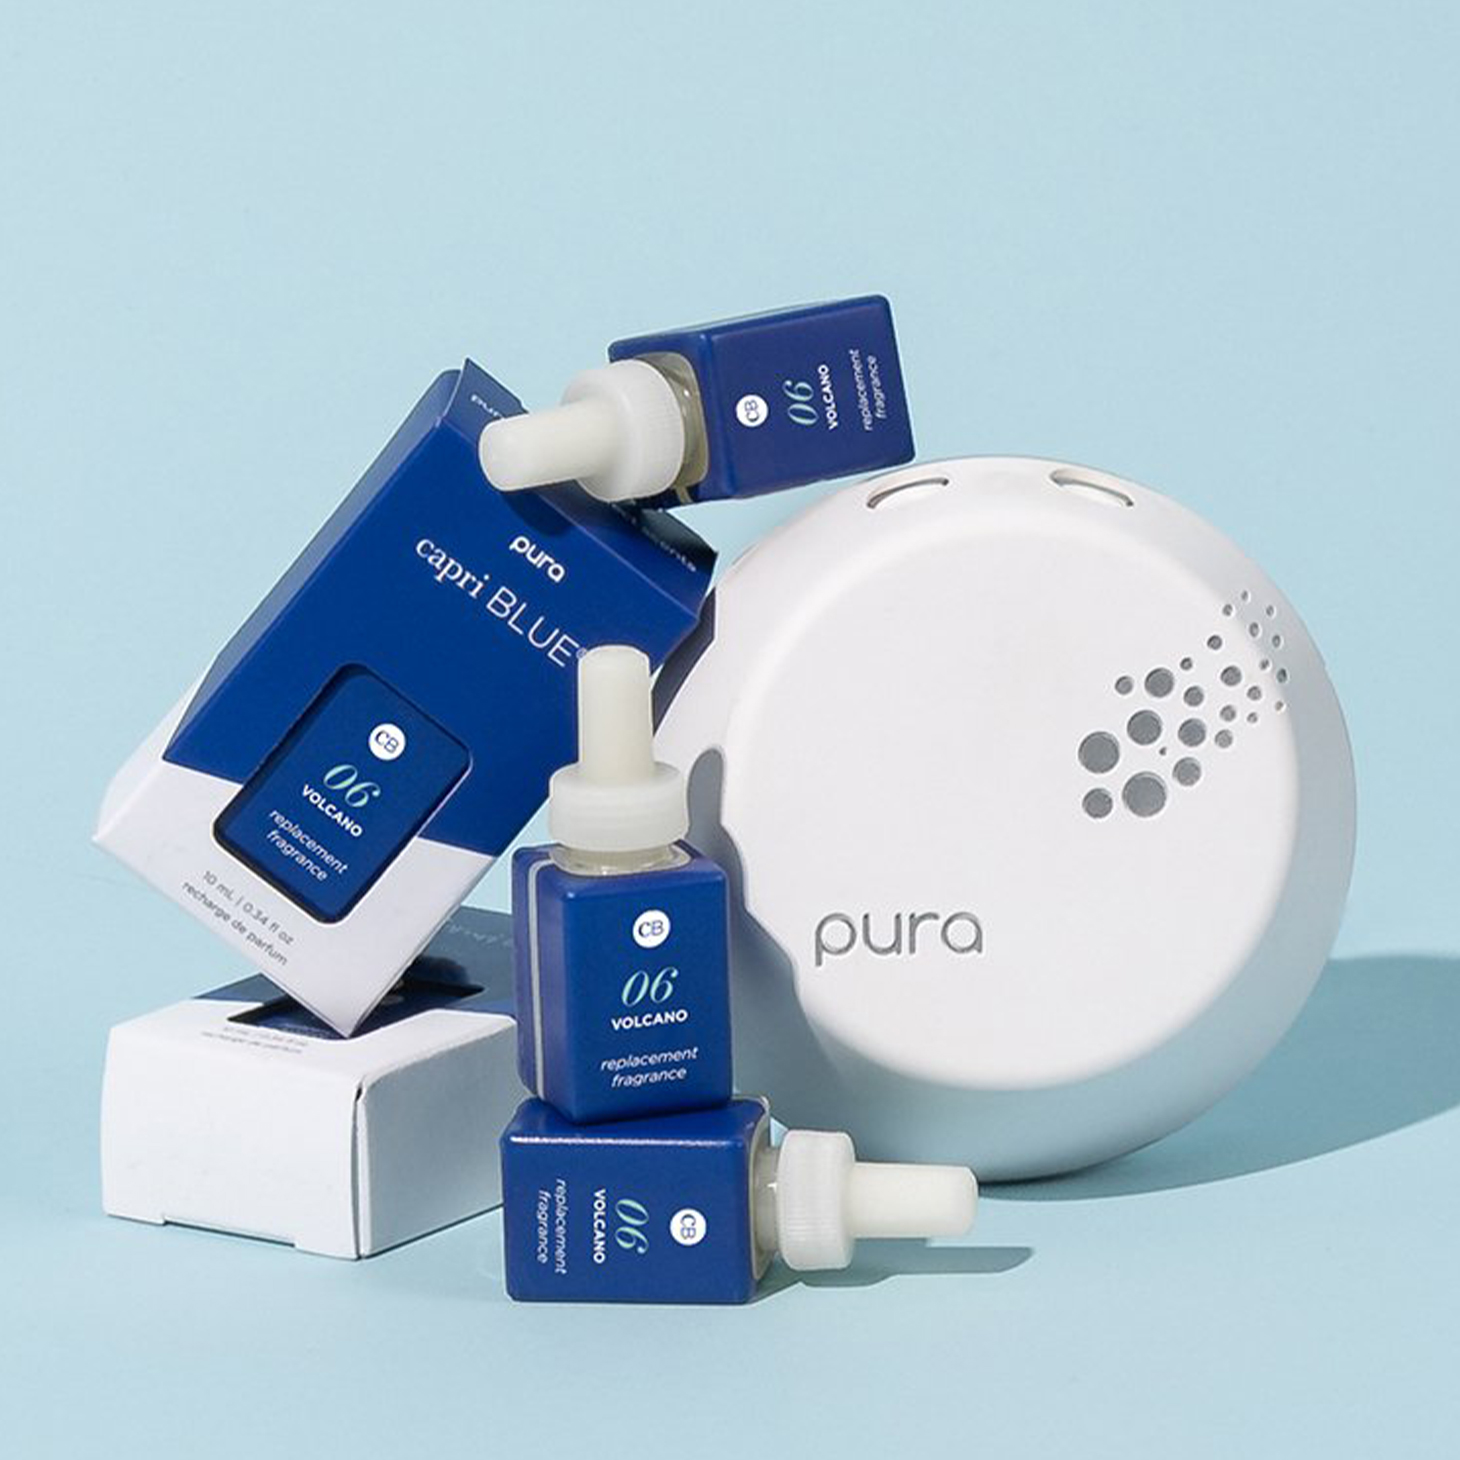 Pura 4 smart fragrance diffuser review - The Gadgeteer